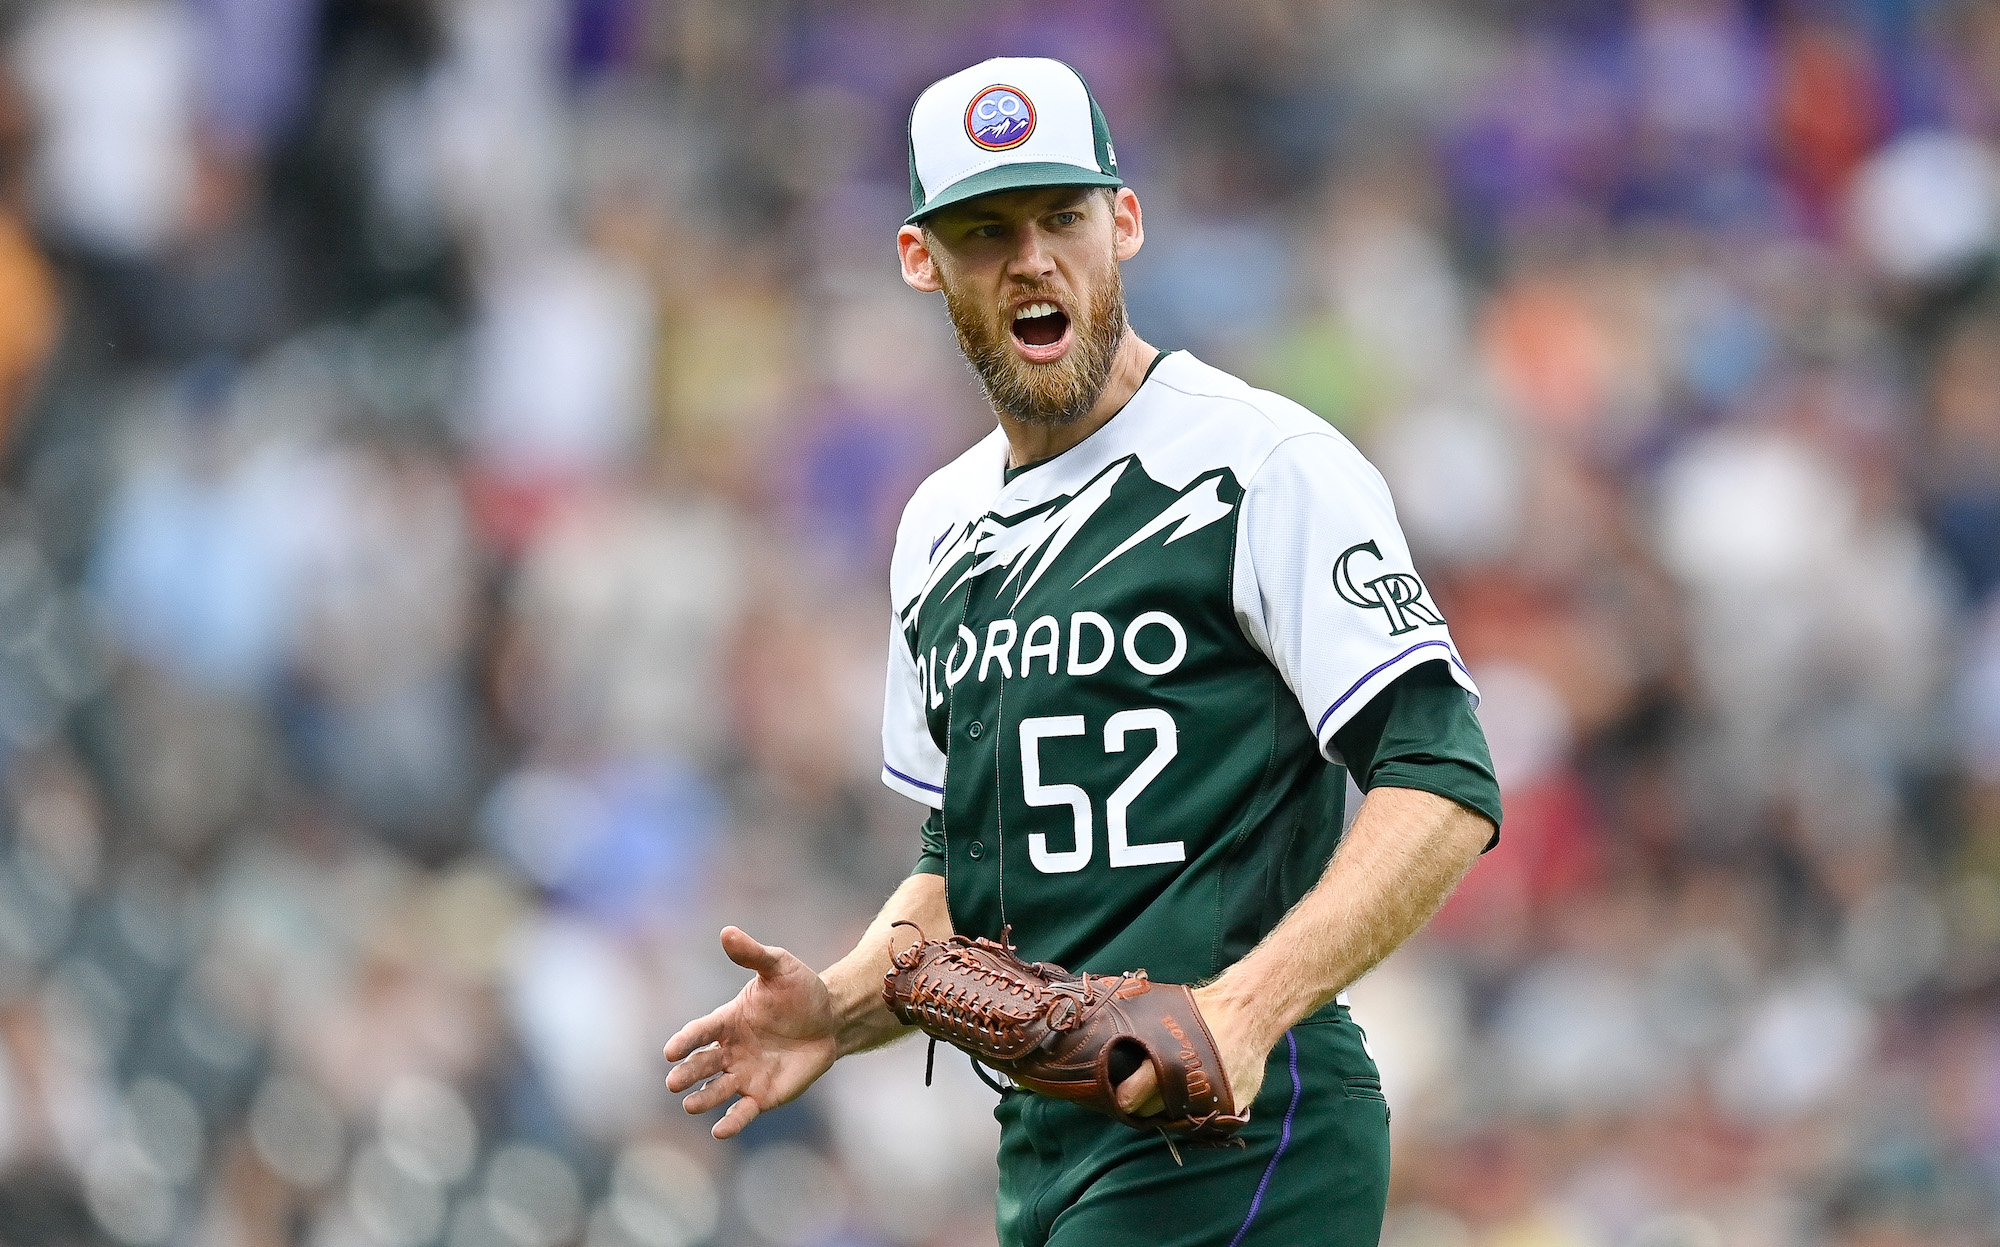 Daniel Bard #52 of the Colorado Rockies celebrates after completing the ninth inning of a game with a win against the Arizona Diamondbacks at Coors Field on July 3, 2022 in Denver, Colorado.